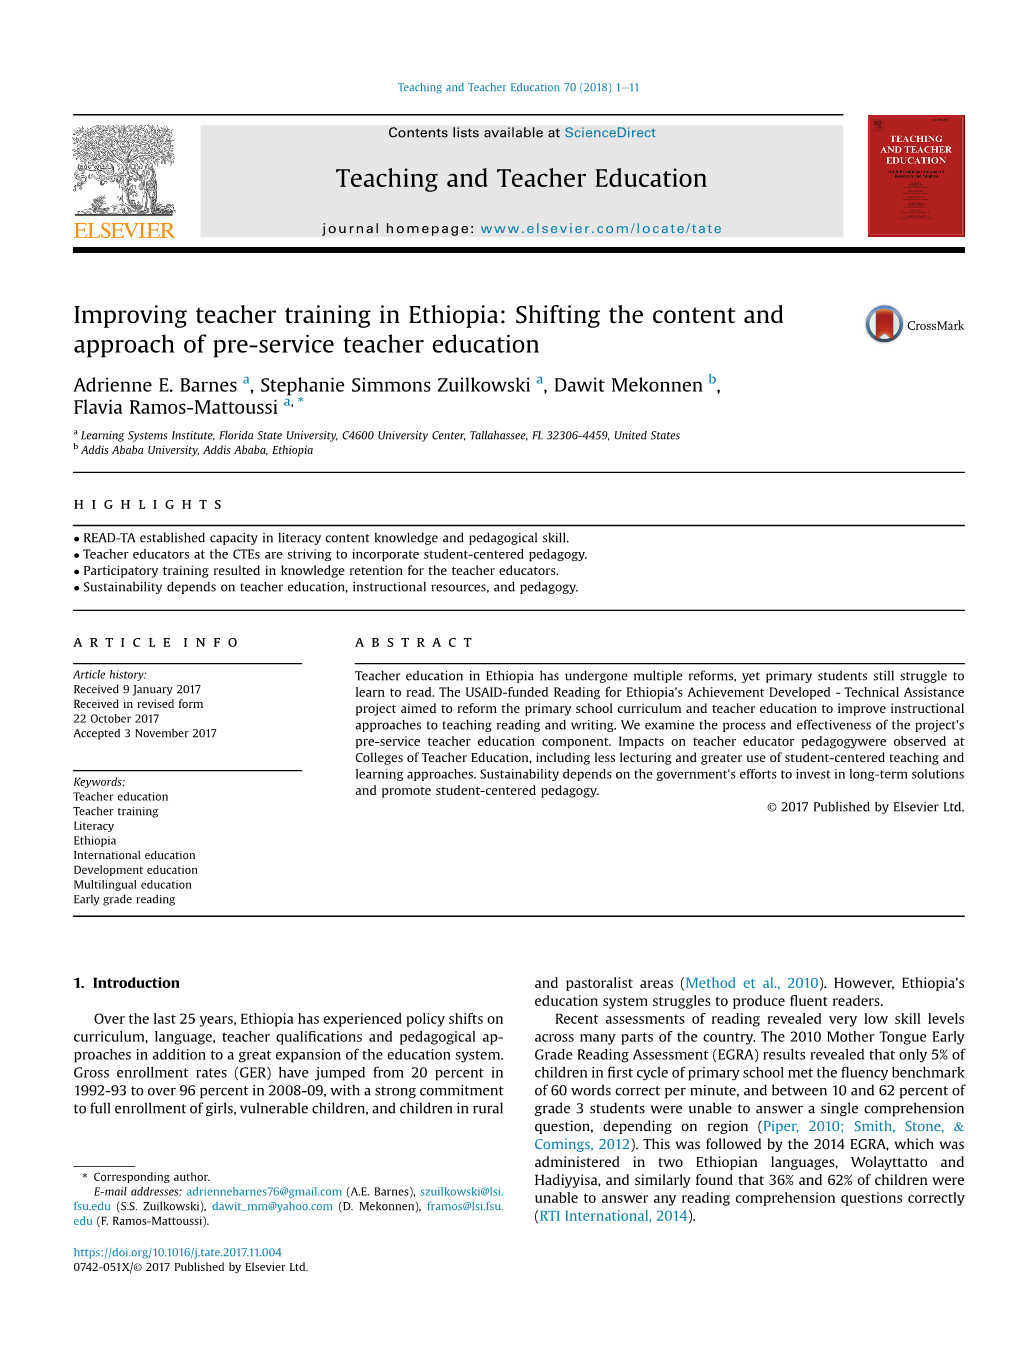 Improving Teacher Training in Ethiopia: Shifting the Content and Approach of Pre-Service Teacher Education